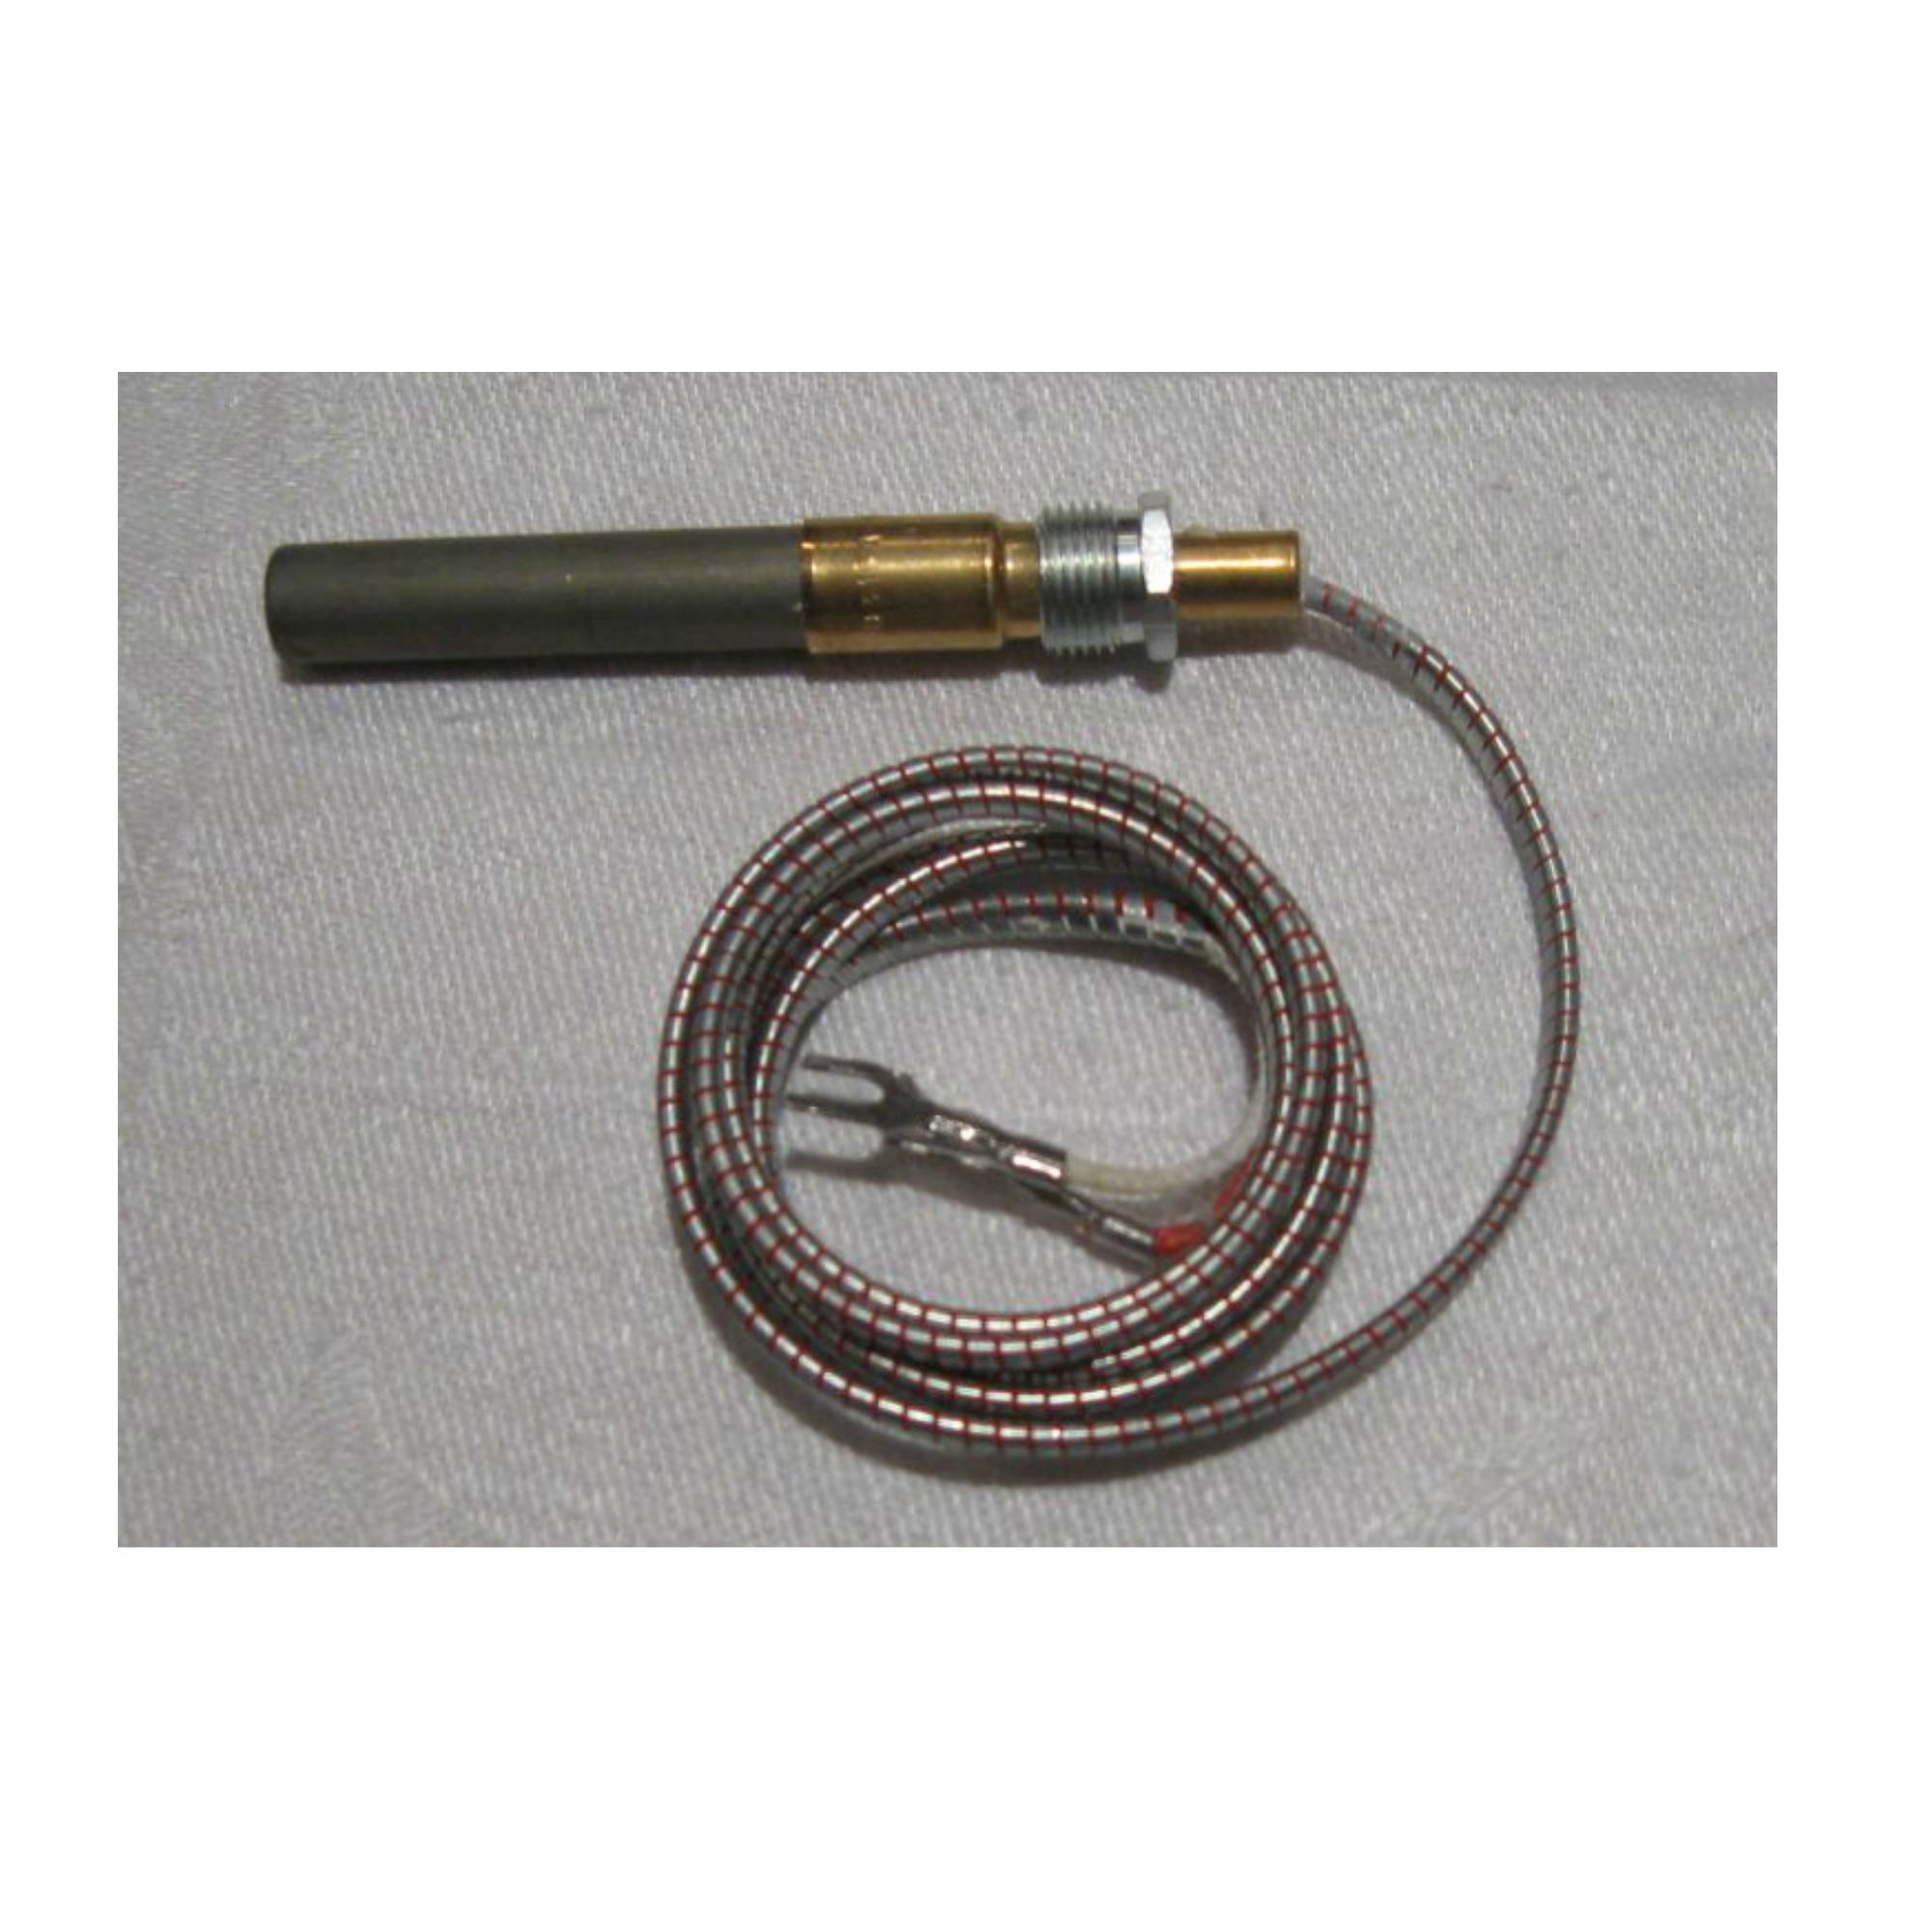 GAS FRYER THERMOPILE THERMOCOUPLE UNIVERSAL 2 WIRE 36" INCH MILLIVOLT GENERATOR 